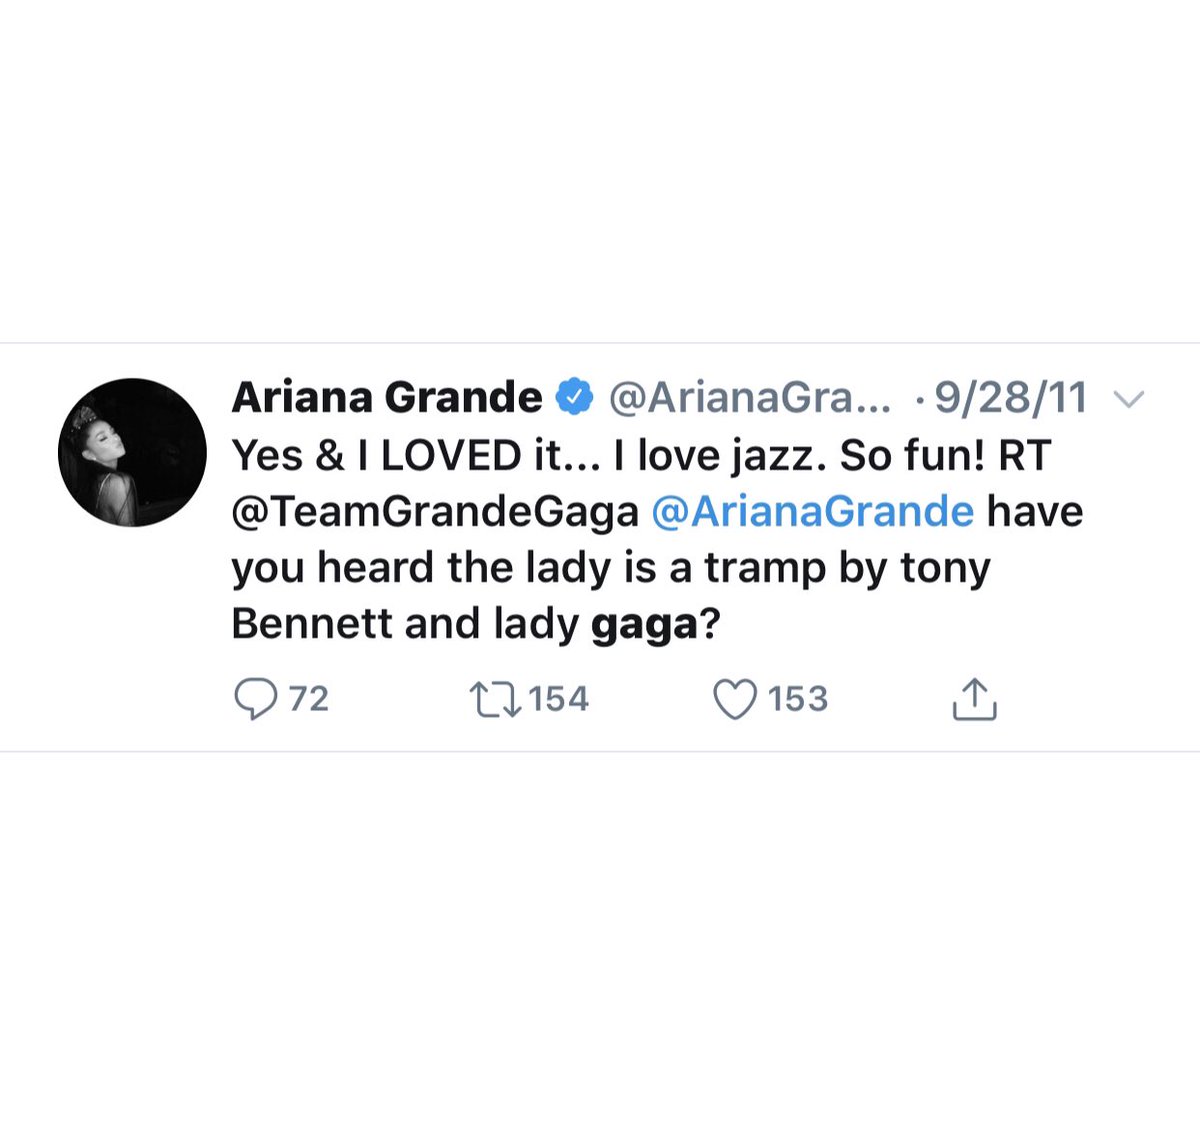 Ariana even showed her love for Gaga’s jazz music with Tony Bennett